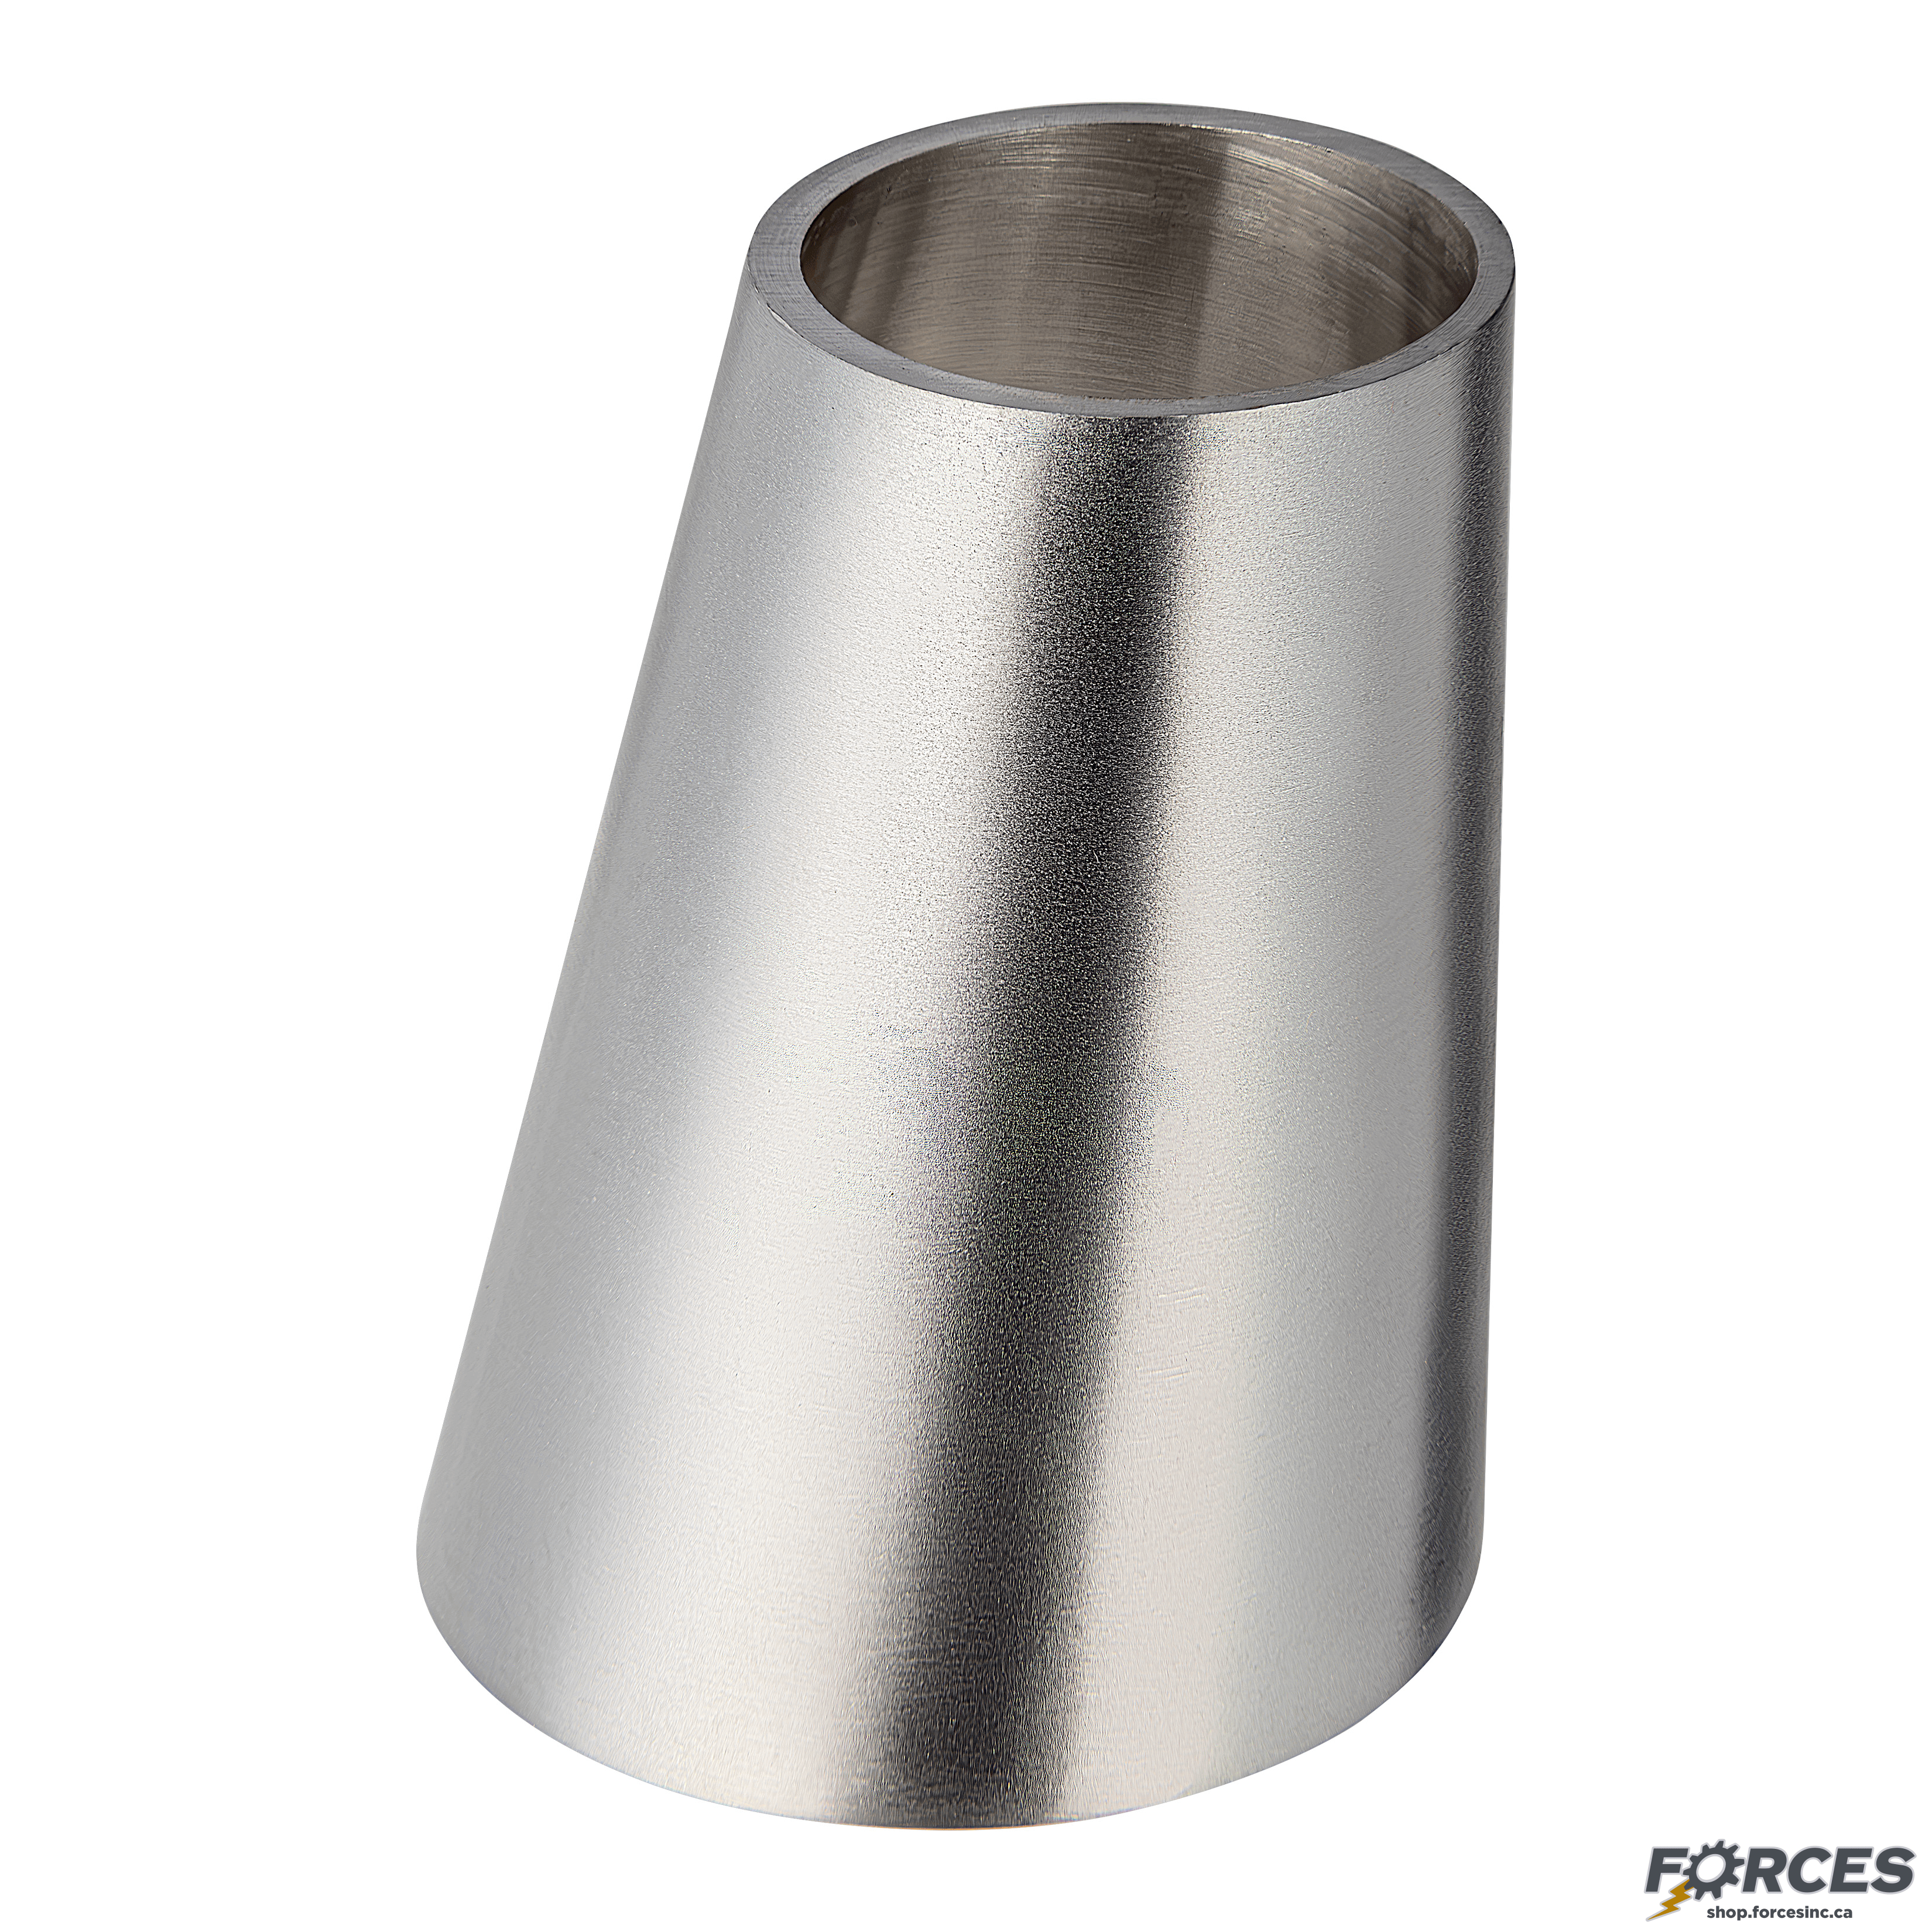 3" x 2-1/2" Butt Weld Eccentric Reducer - Stainless Steel 316 - Forces Inc